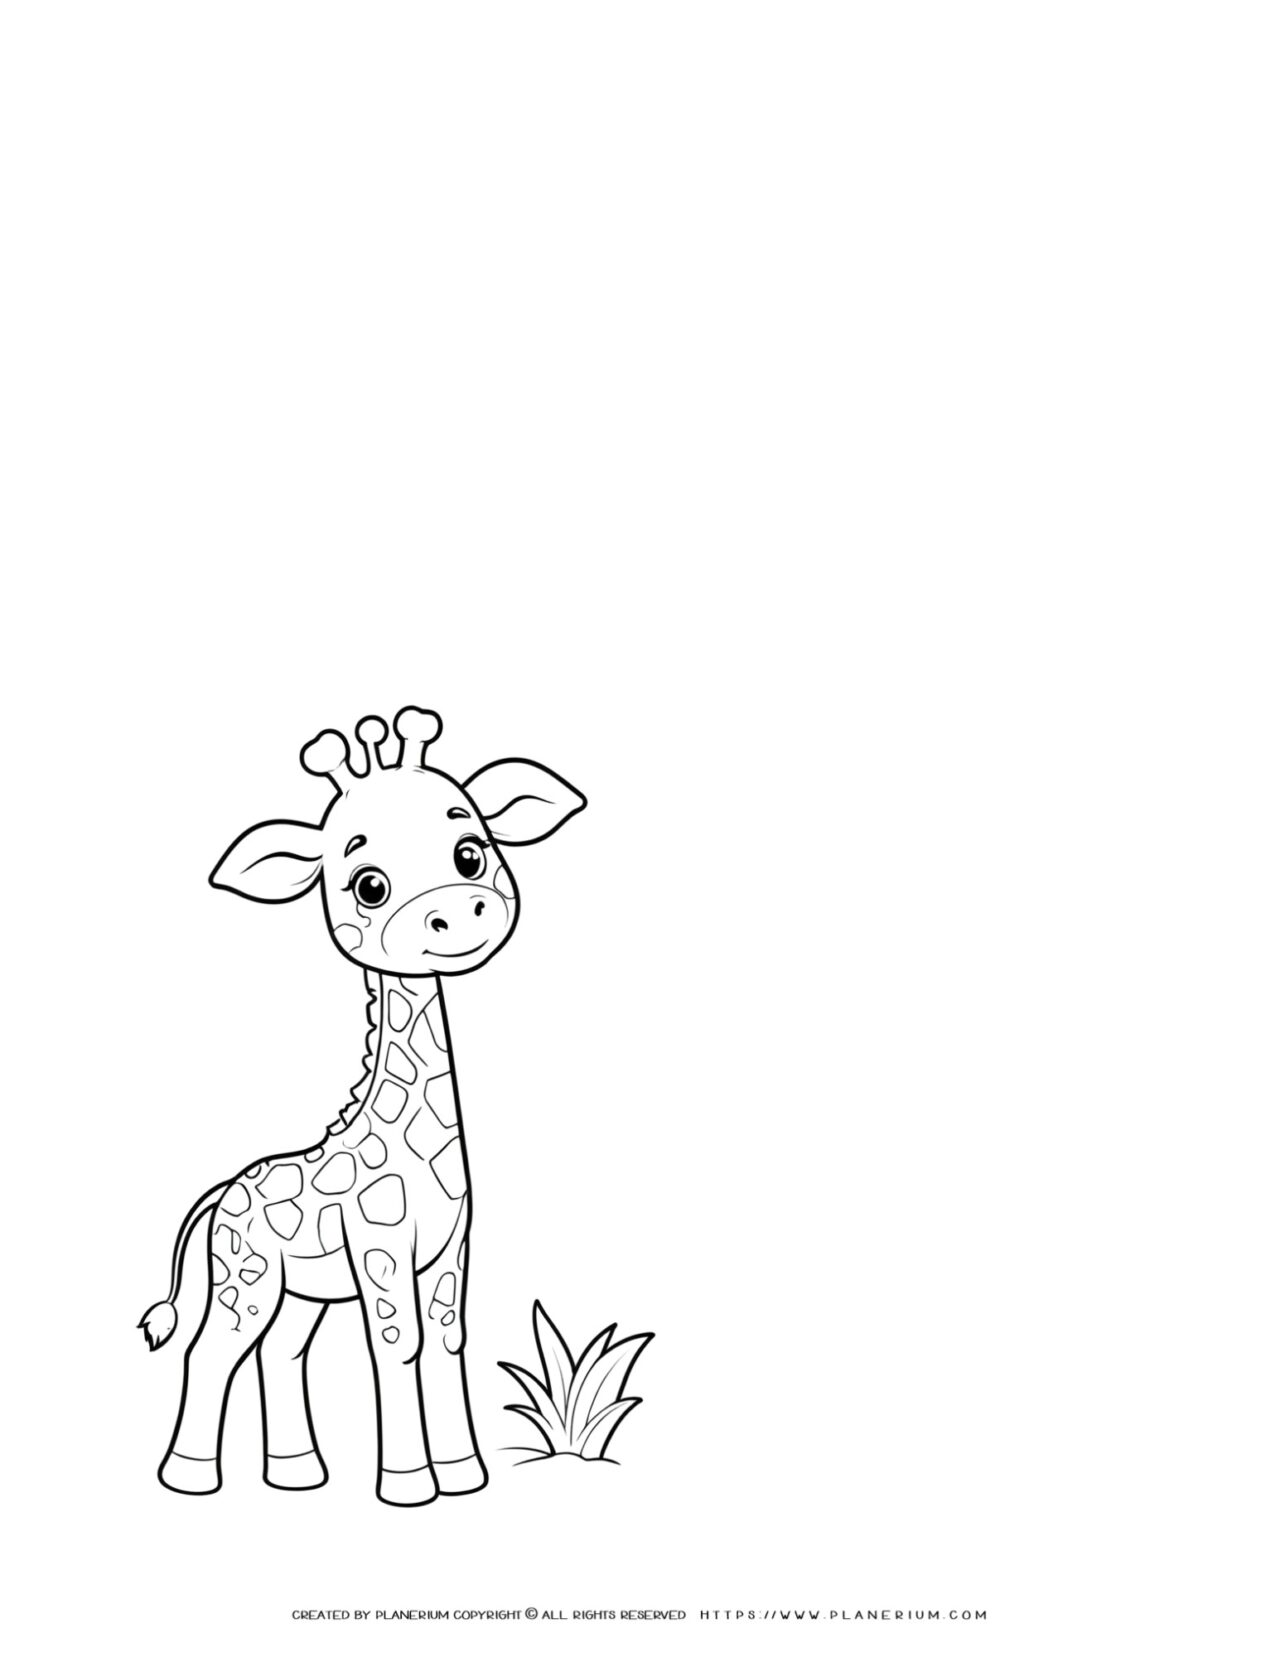 giraffe-writing-and-coloring-page-template